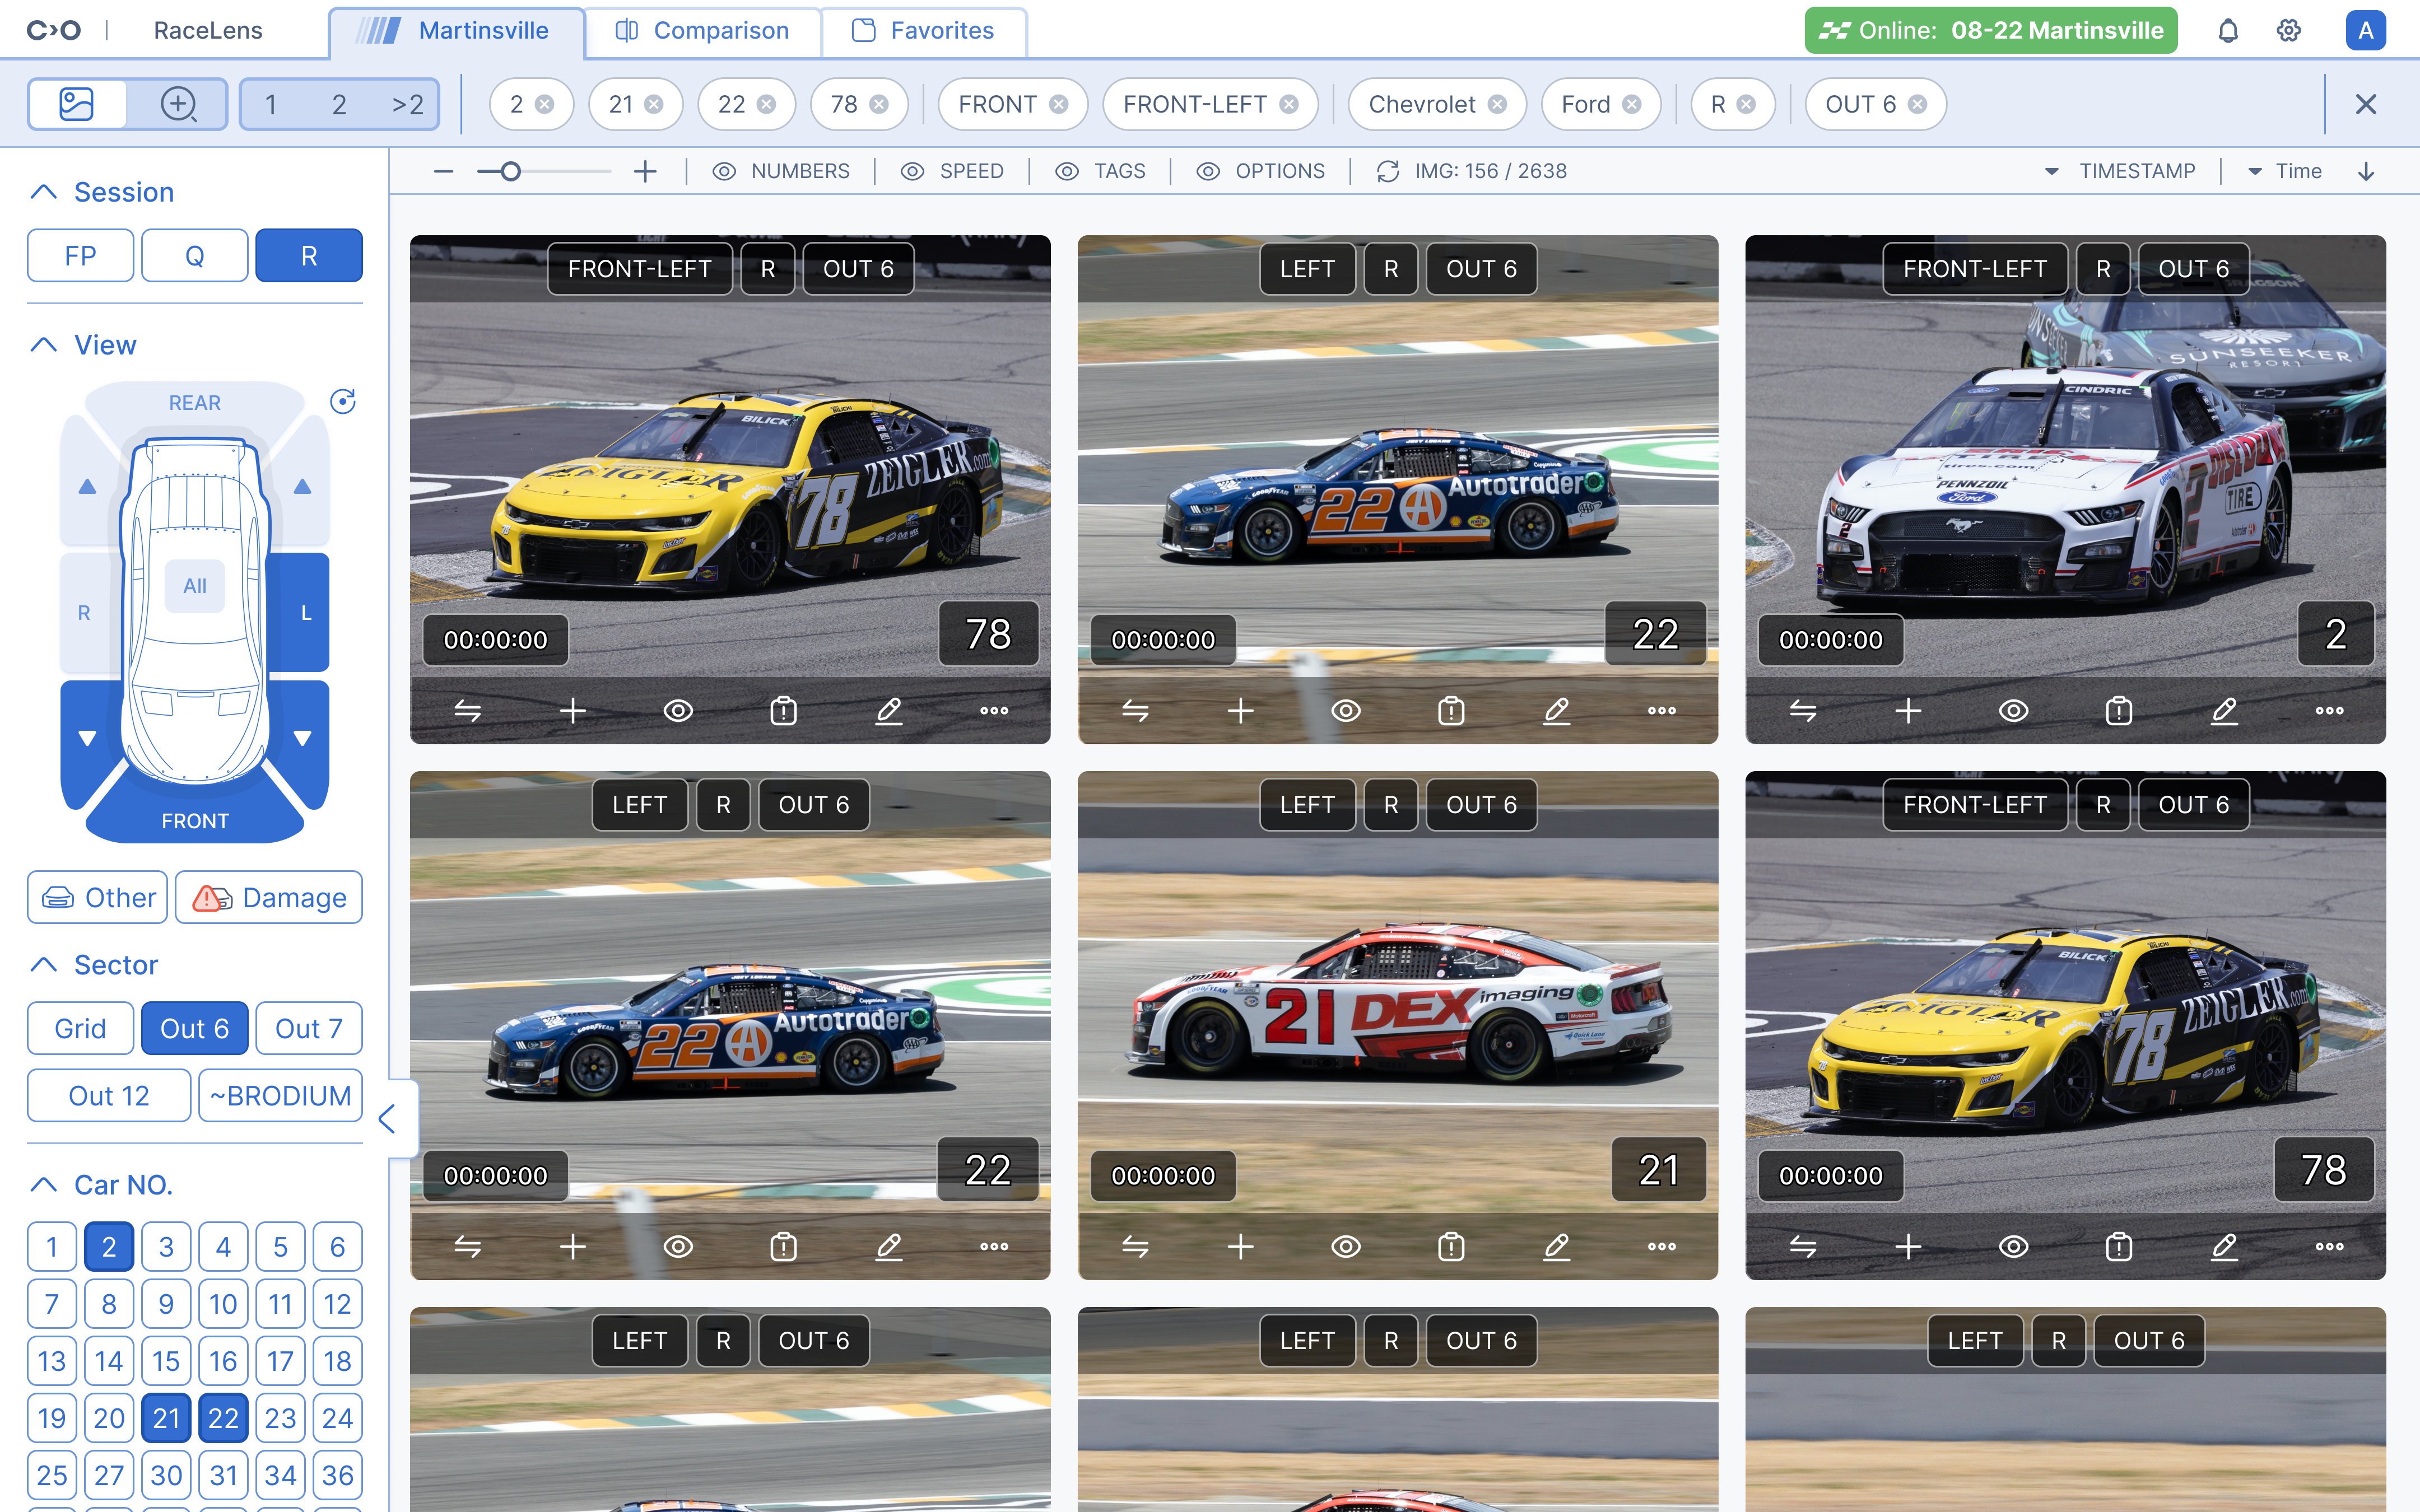 Race lens: A machine intelligence-based application for racing photo analysis